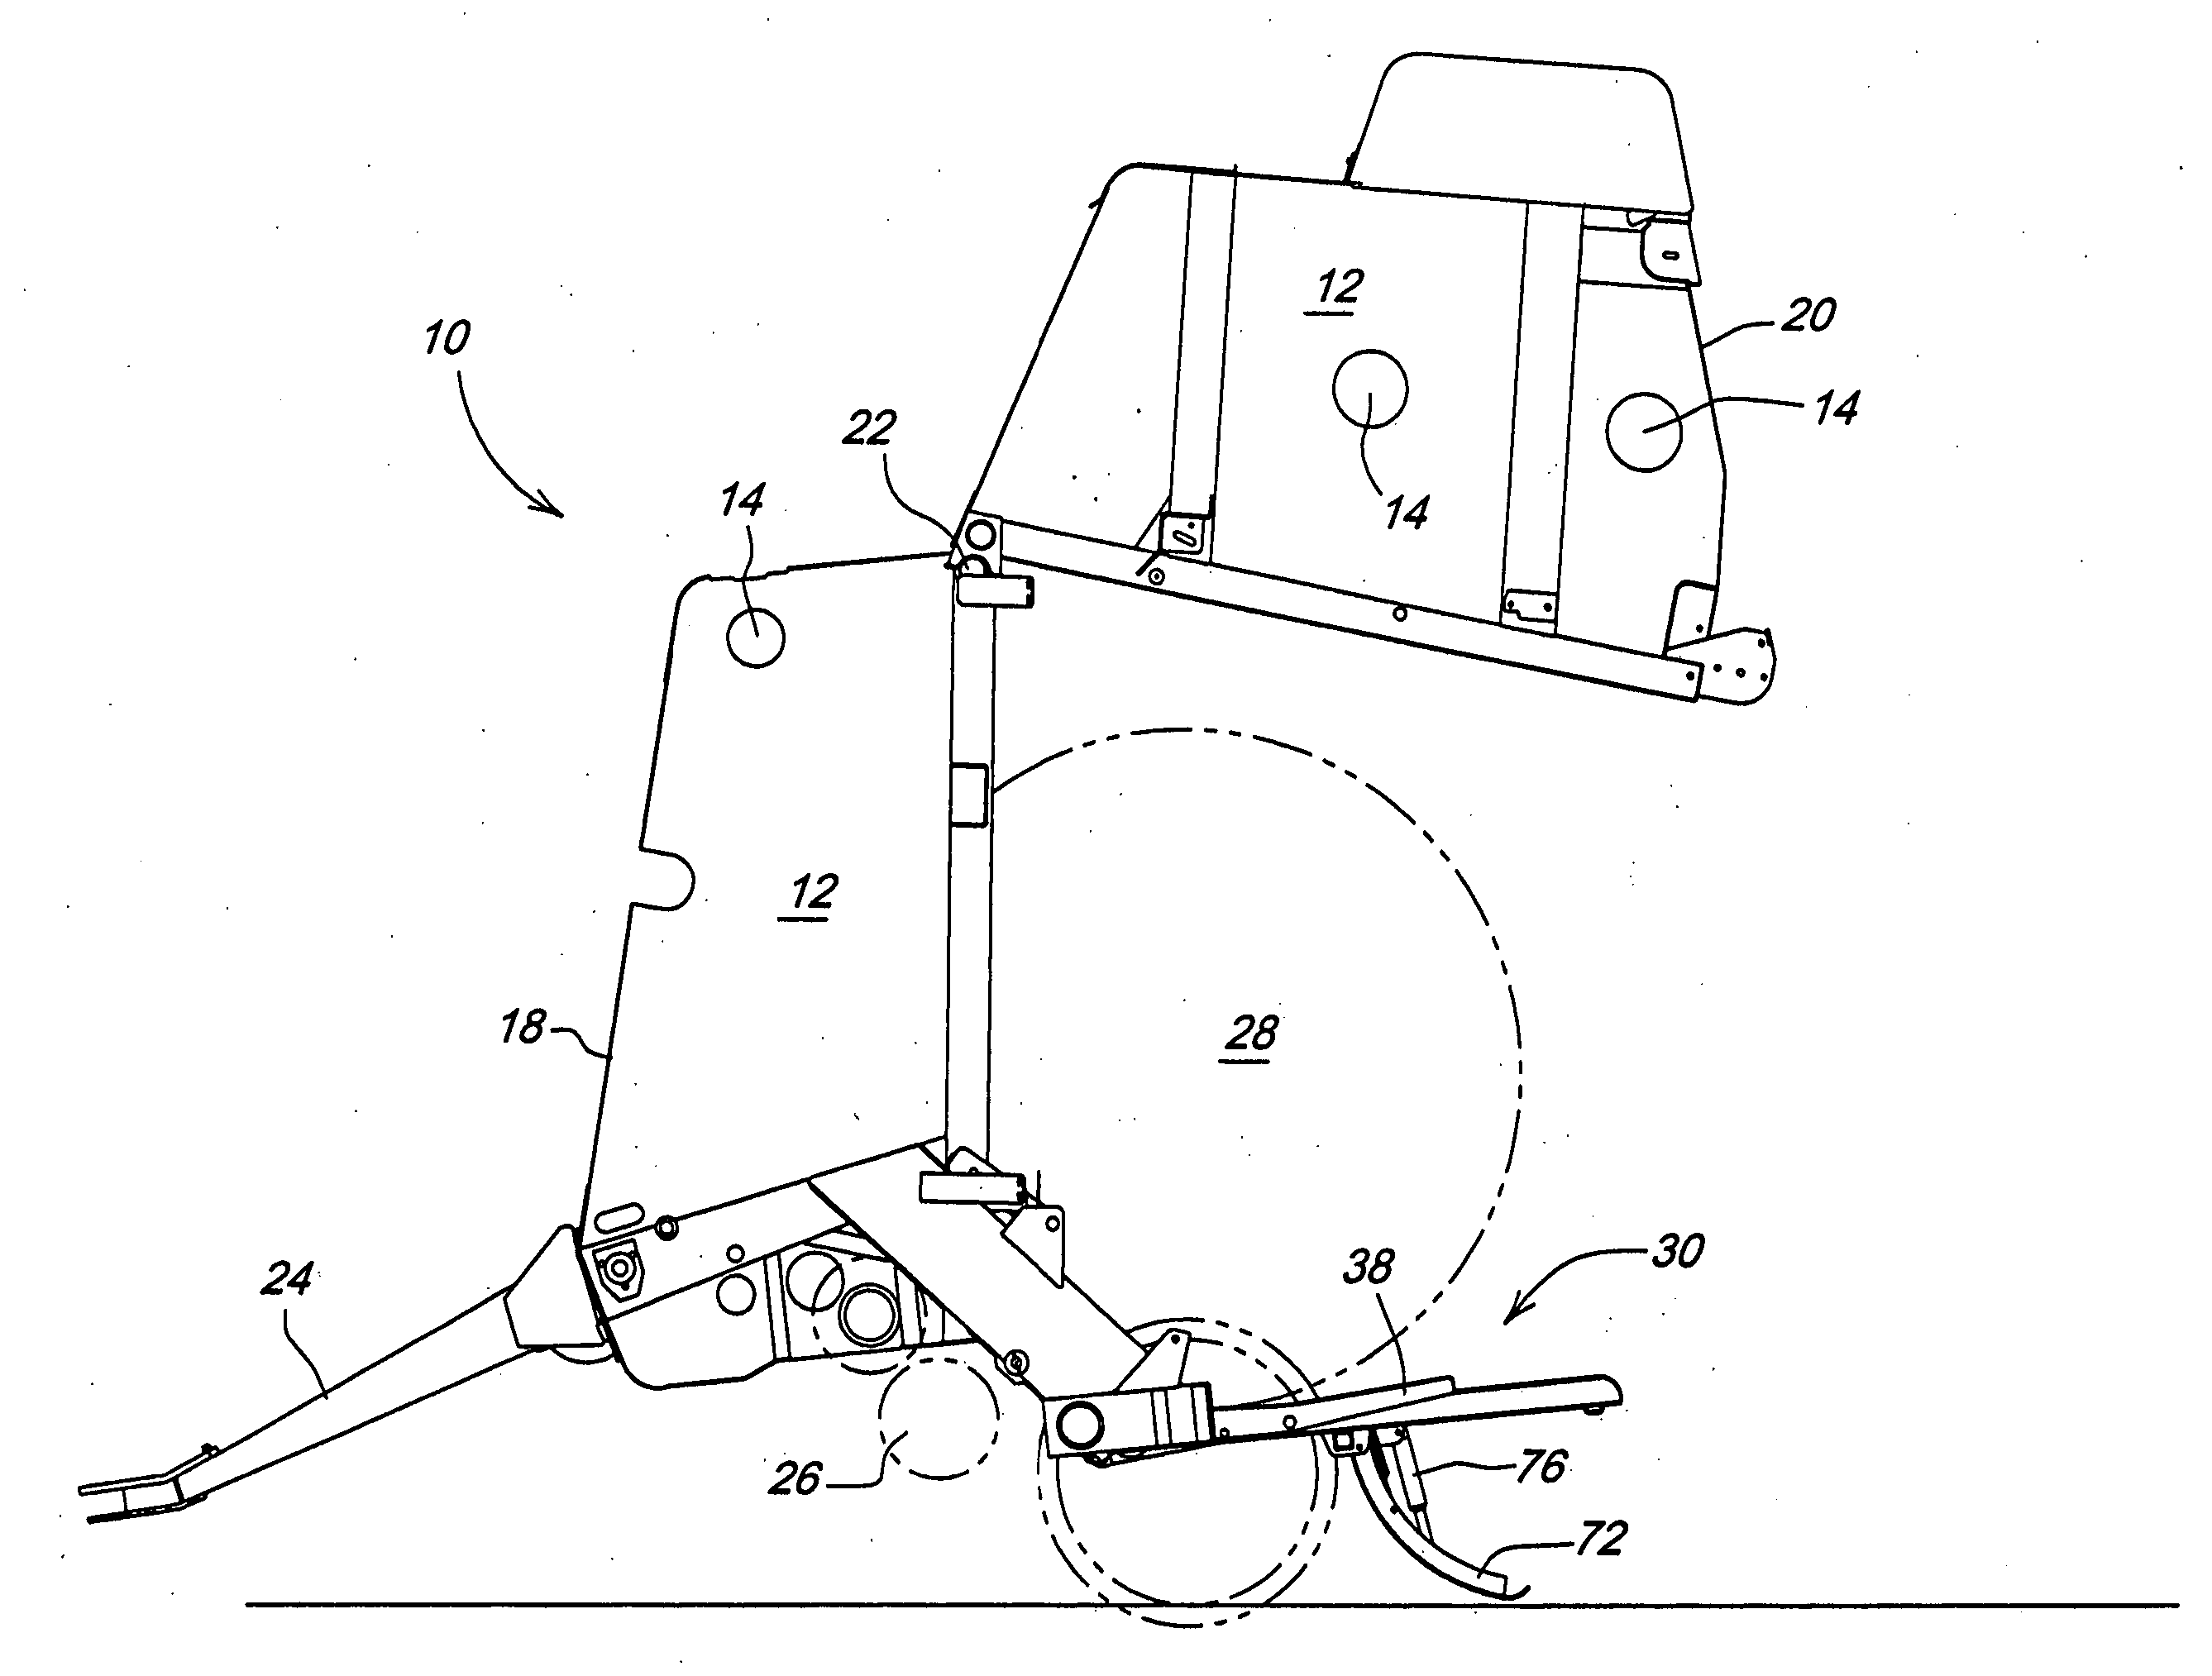 Controlled bale ejection mechanism